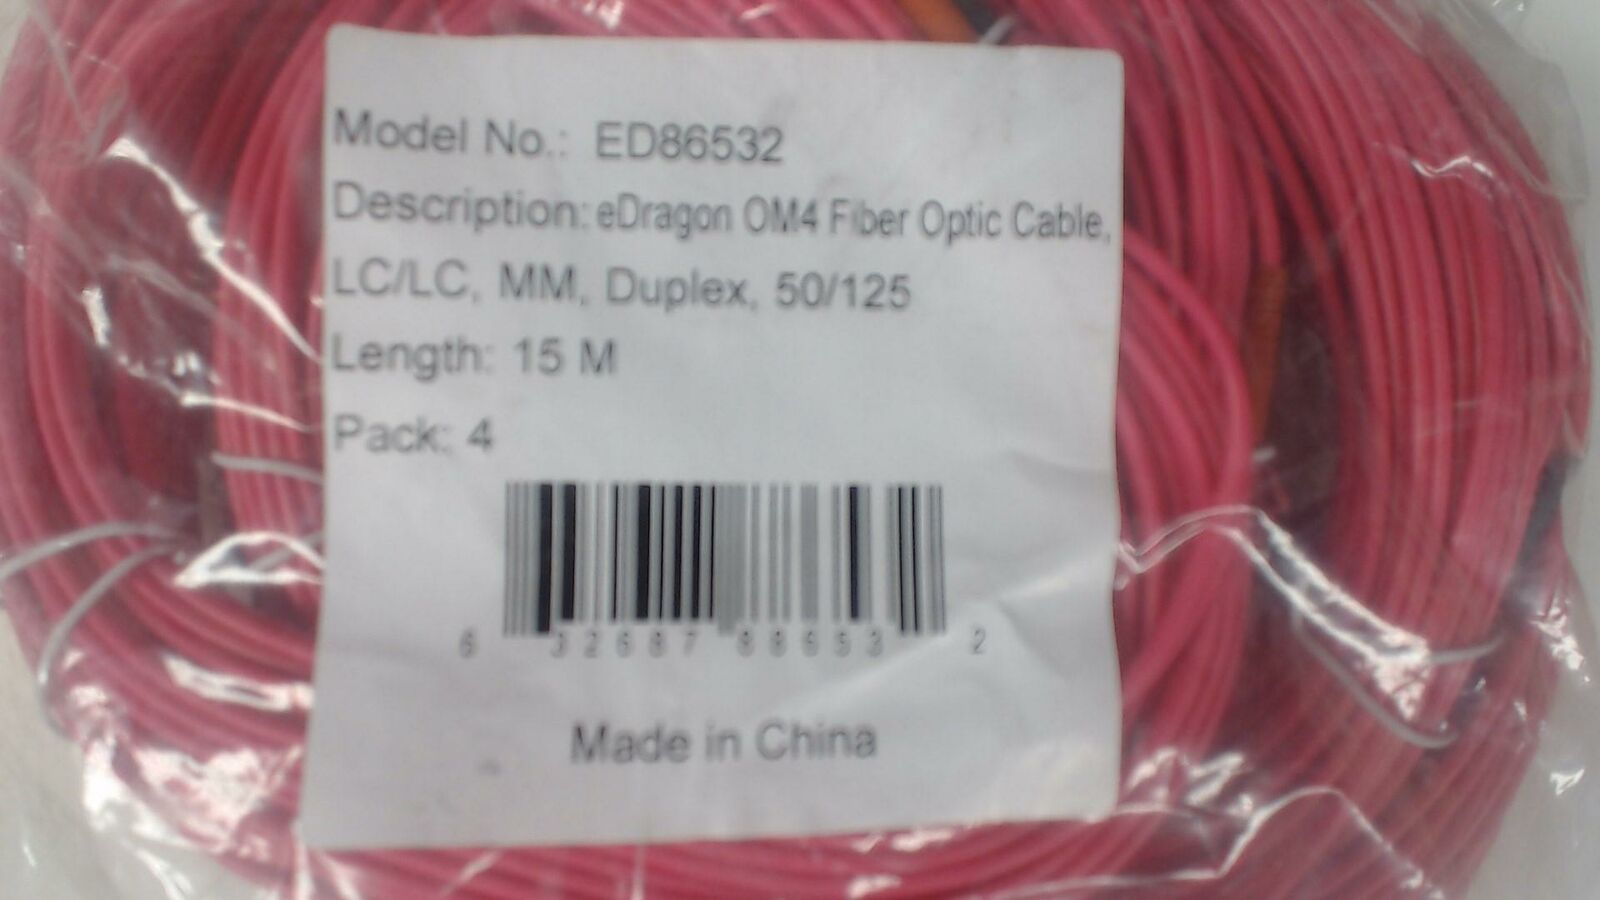 Lot of four: Pink 15 Meter - LC / LC Multimode Duplex 50/125 Fiber Optic Cable 